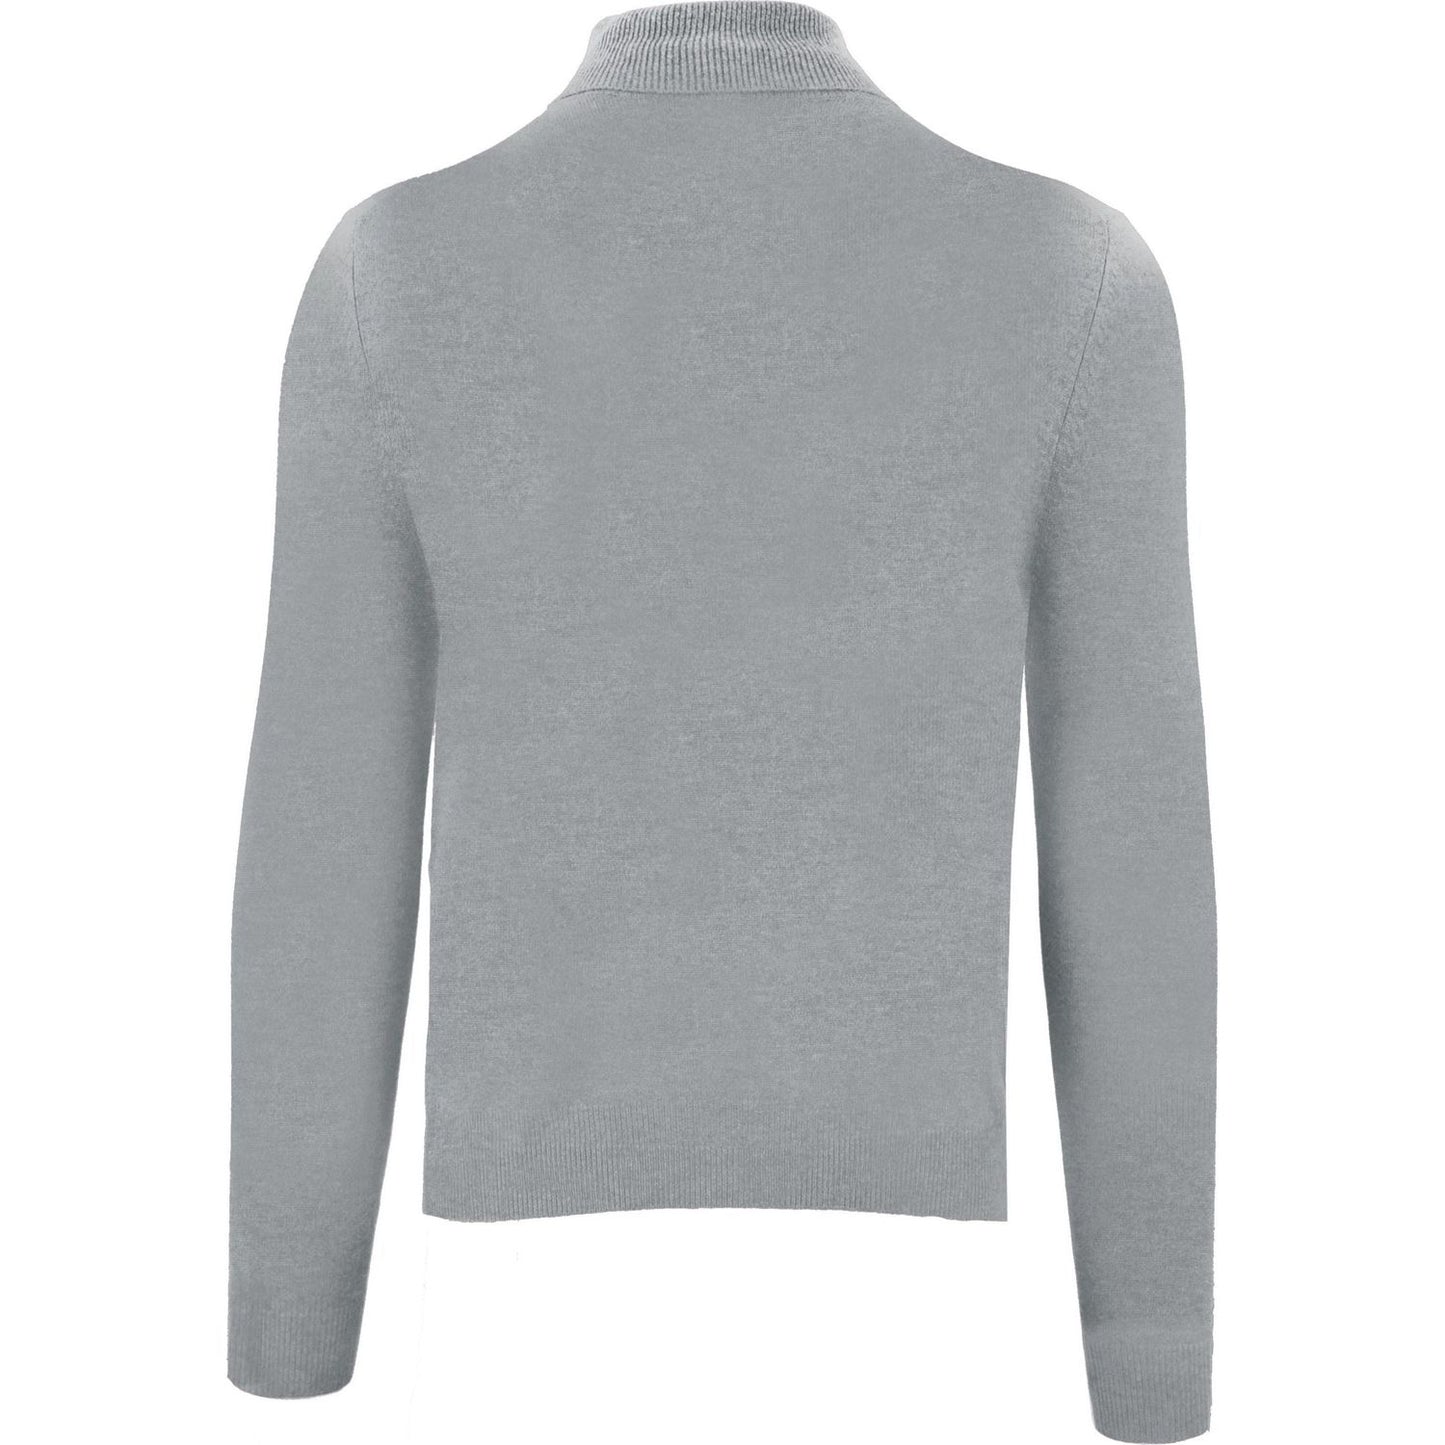 Malo Elevated Cashmere High Neck Sweater gray-cashmere-sweater-3 MAN SWEATERS product-7510-86521919-48-scaled-4496f71e-306.jpg